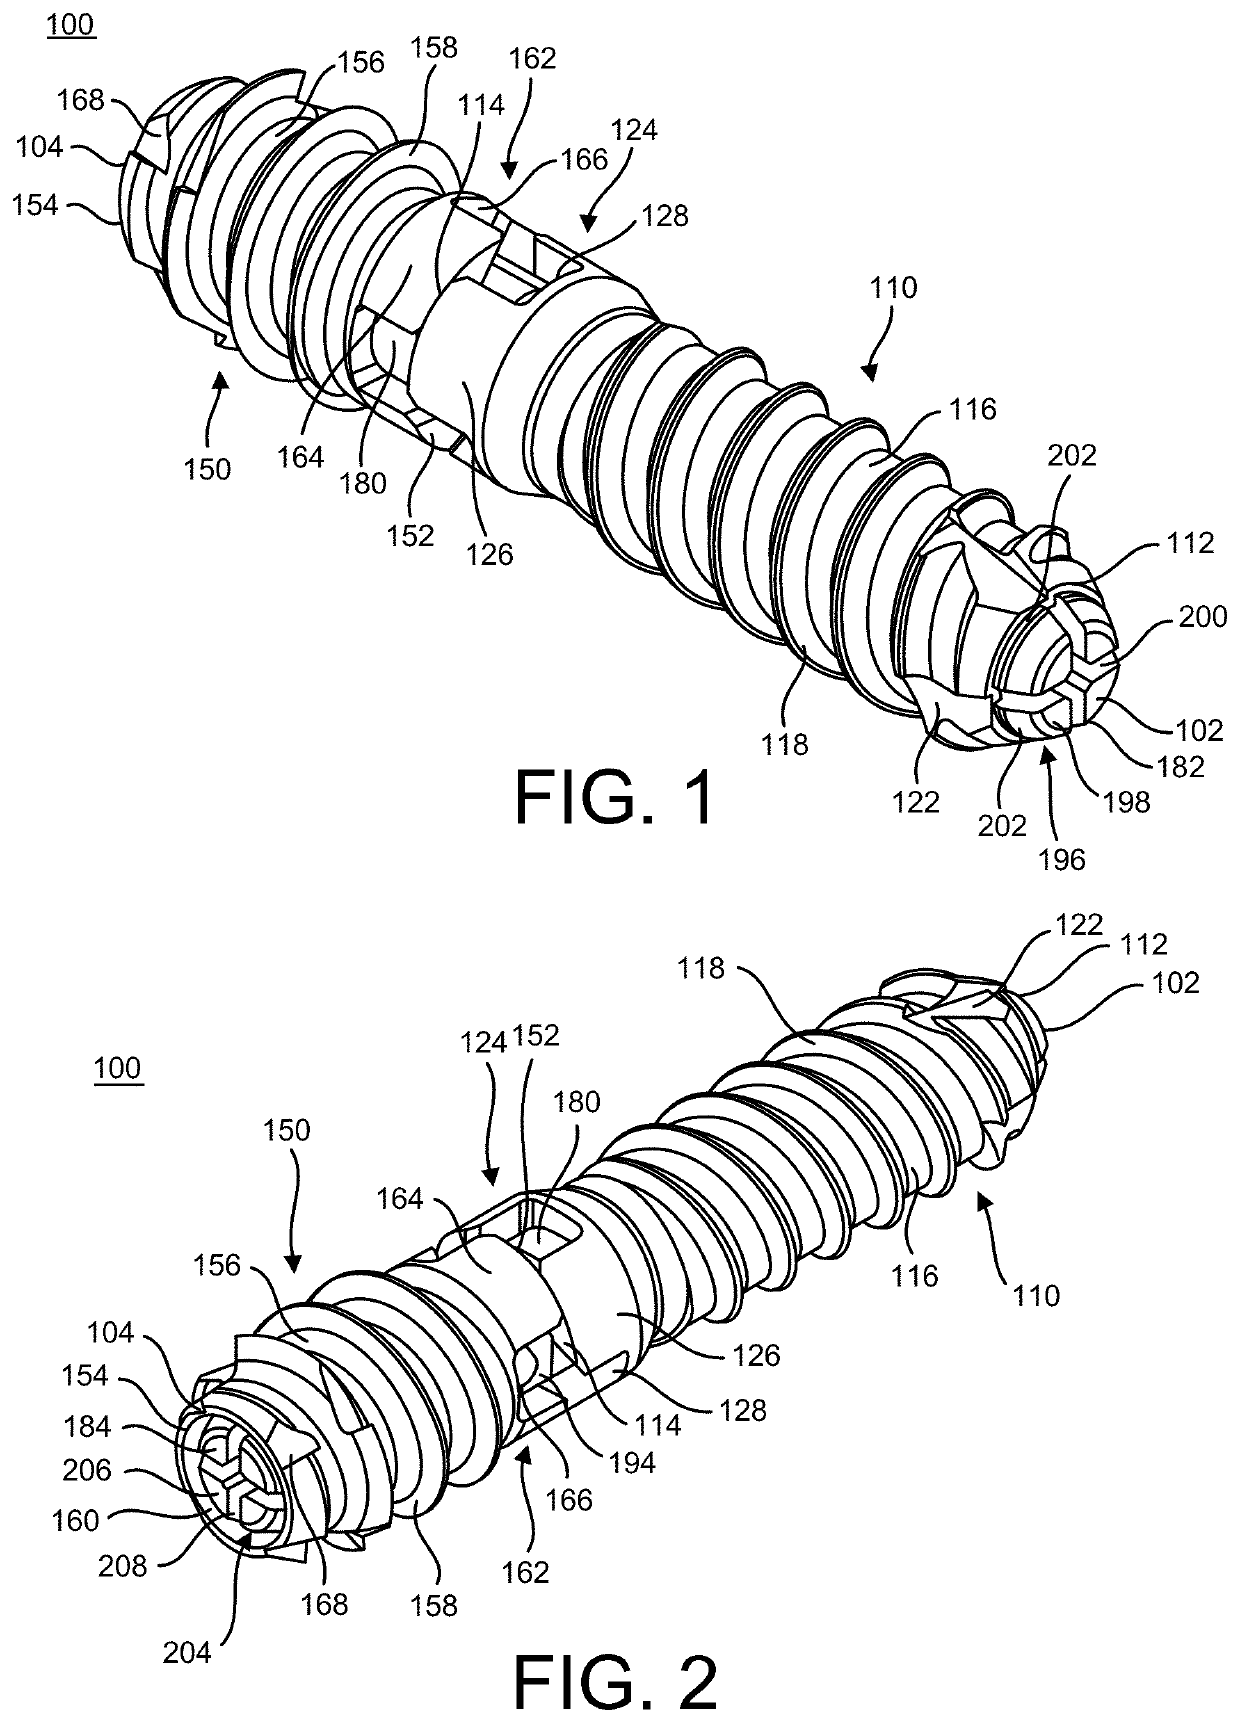 Implants and methods of use and assembly